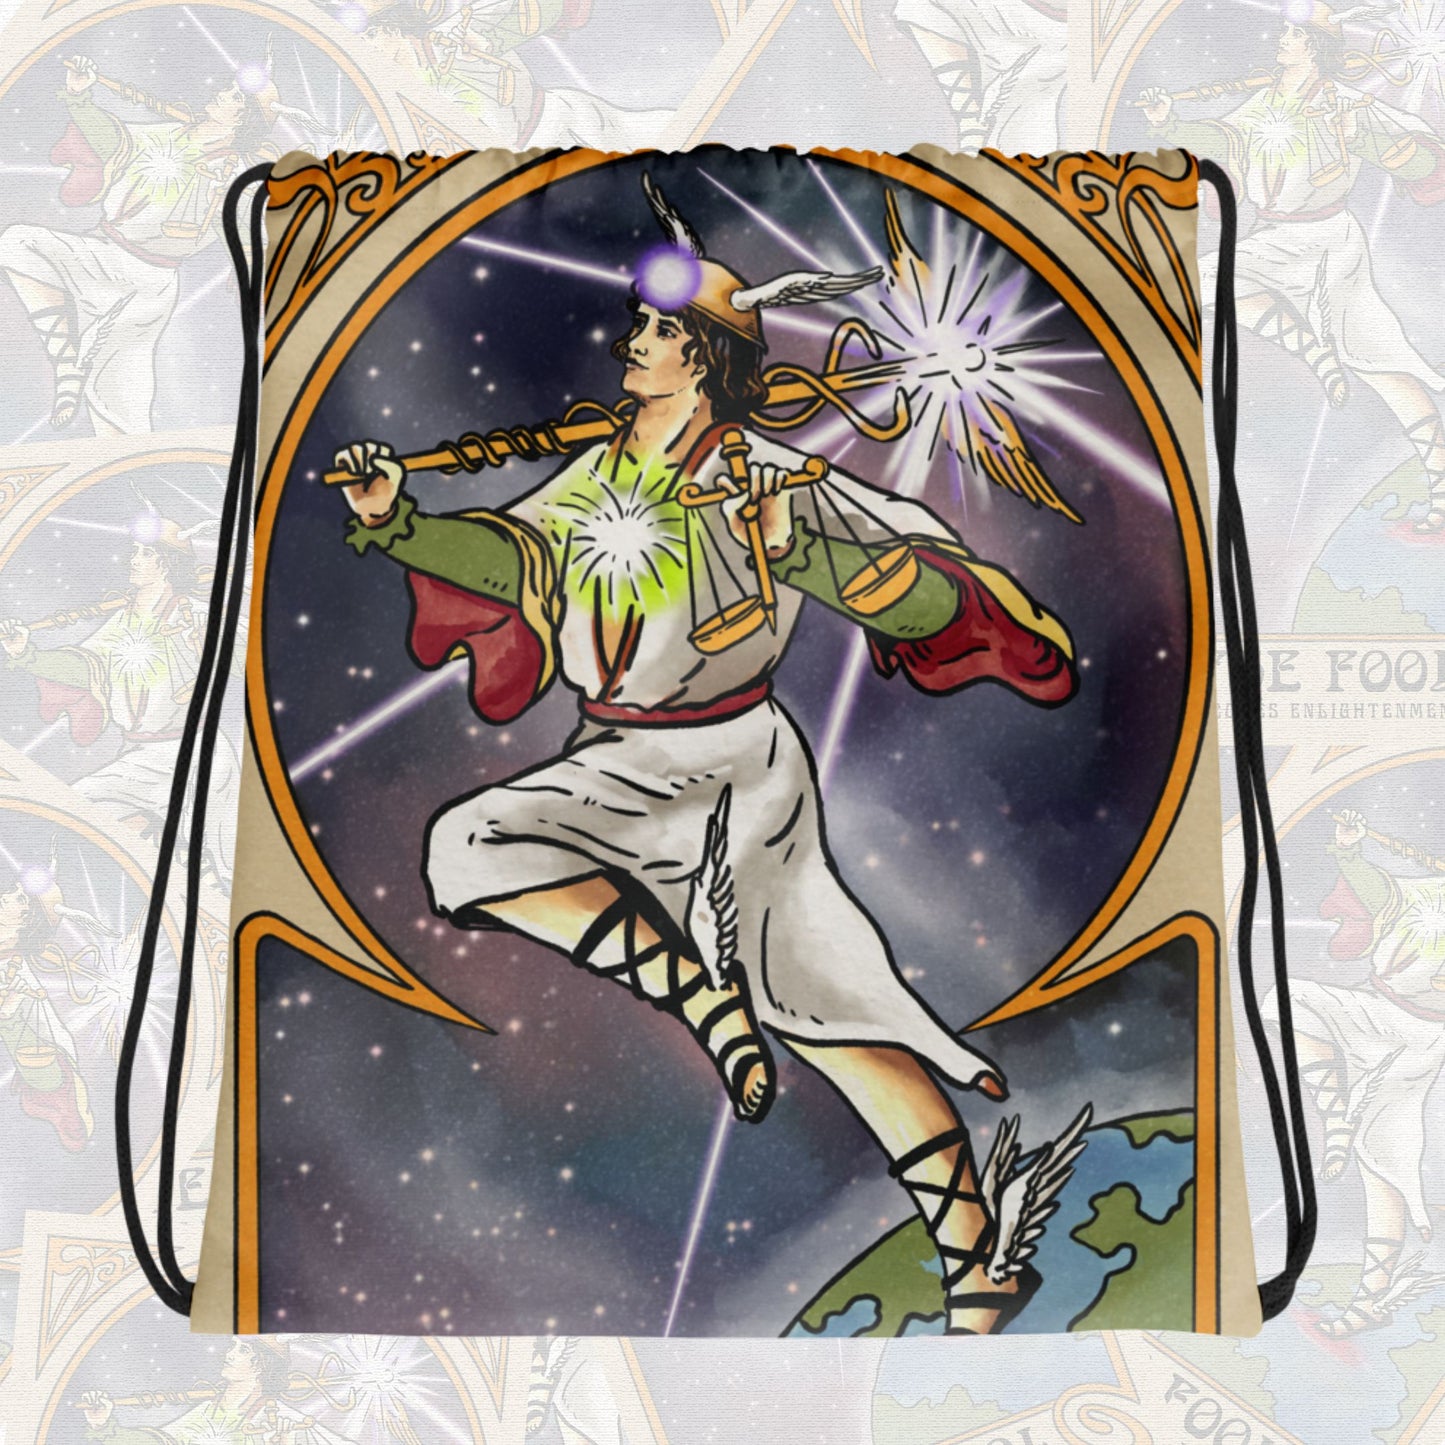 'The Fool Becomes Enlightened Drawstring bag | Tarot Card Themed